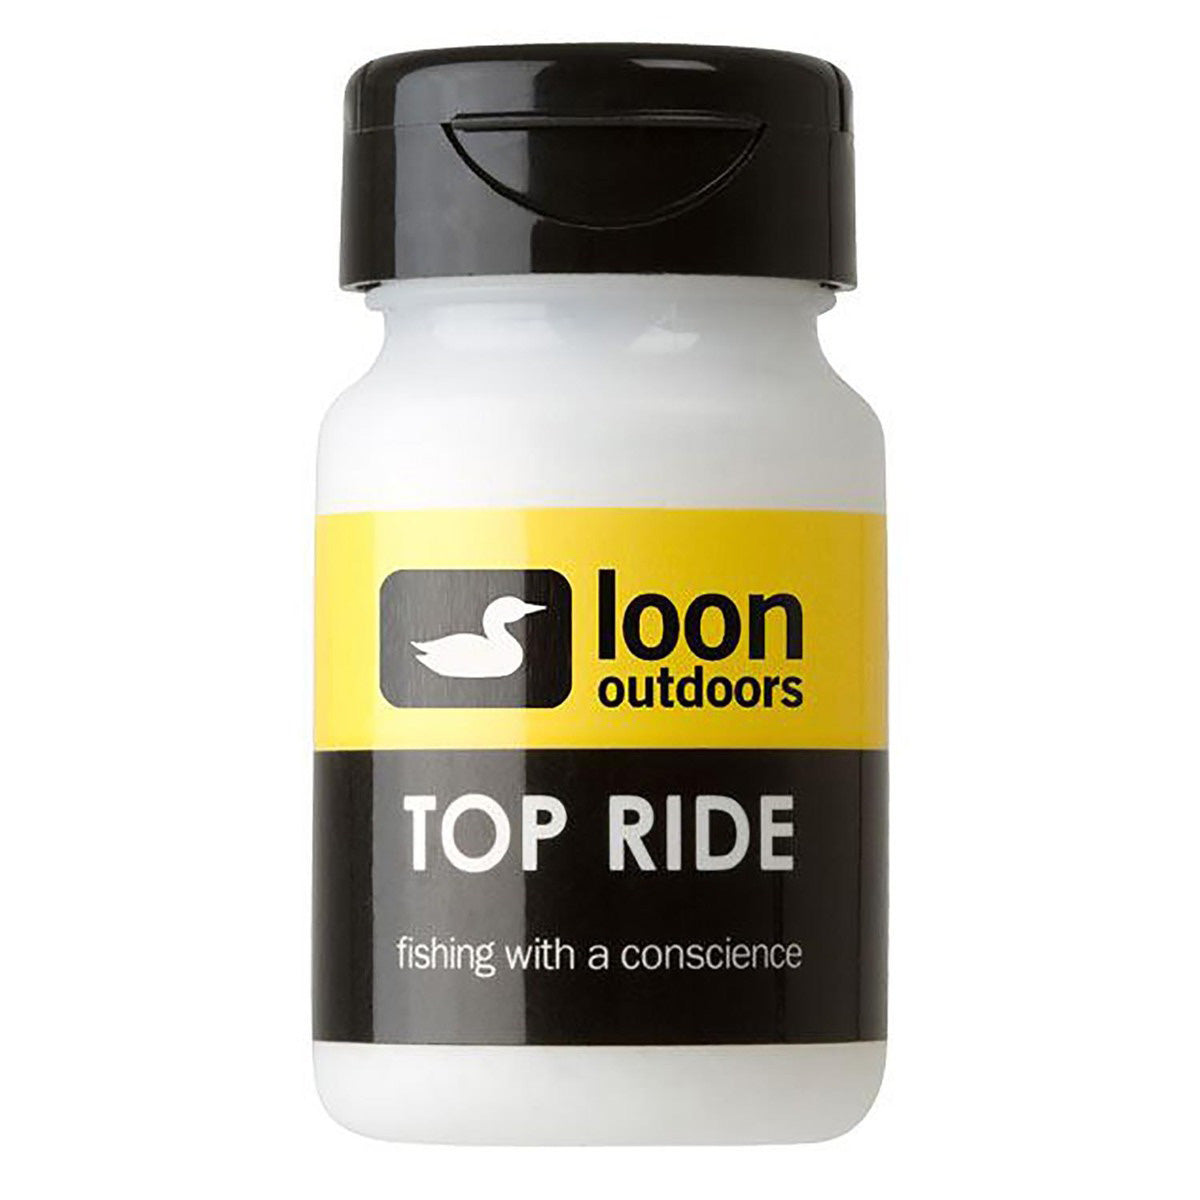 loon outdoors Top Ride dry fly floatant. this is a bottle that you open and place your fly inside and shake to apply the floatant.